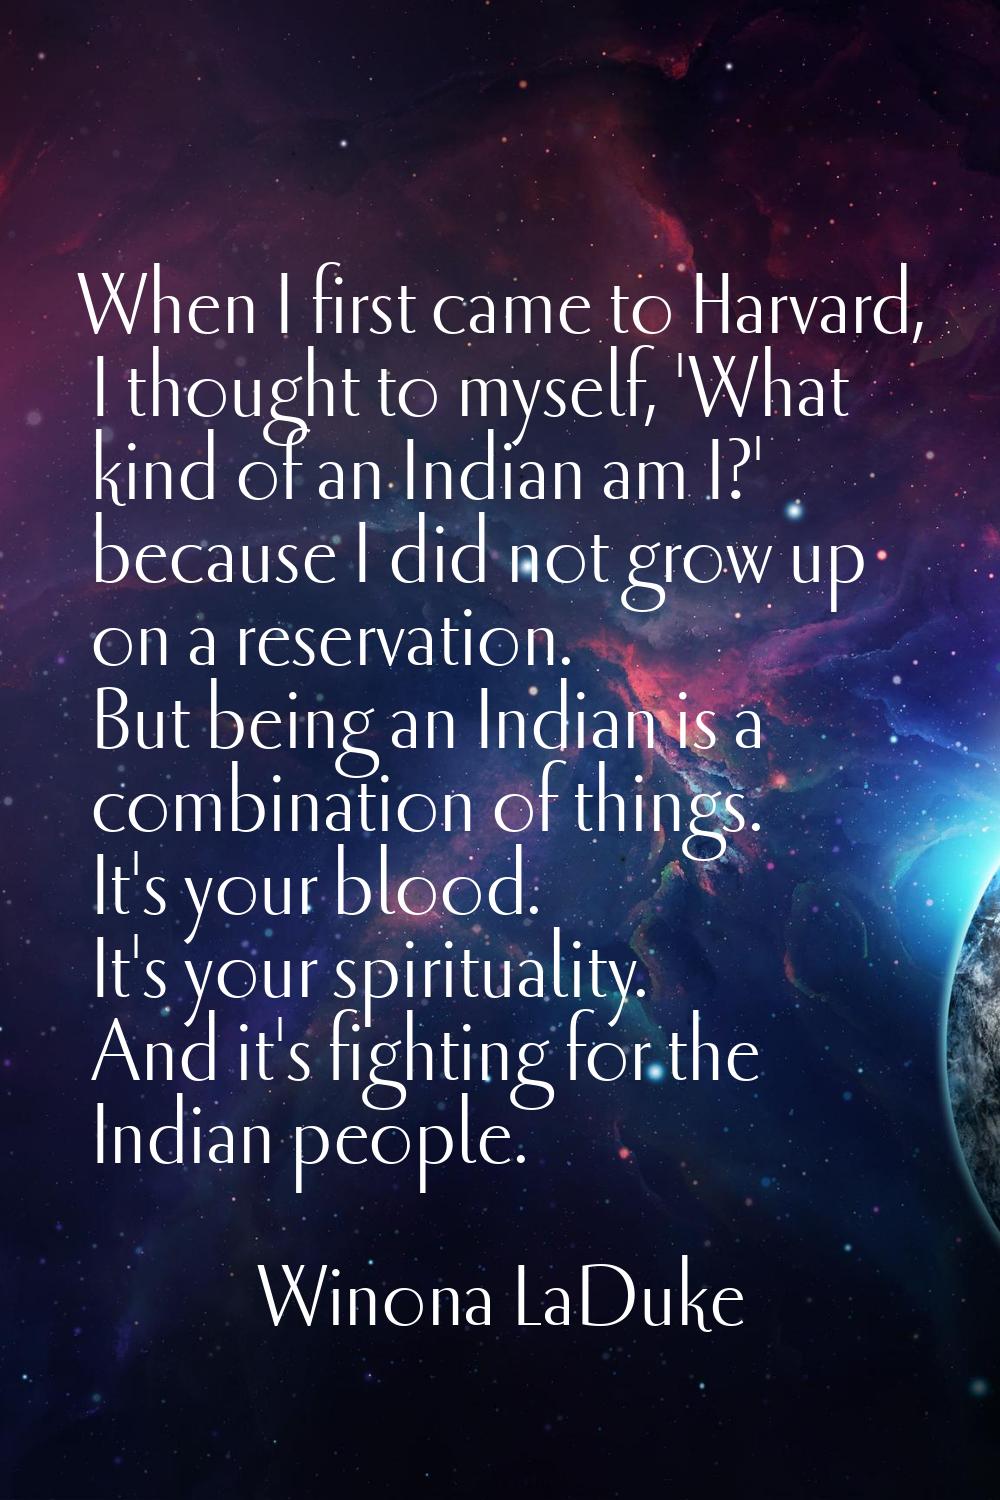 When I first came to Harvard, I thought to myself, 'What kind of an Indian am I?' because I did not